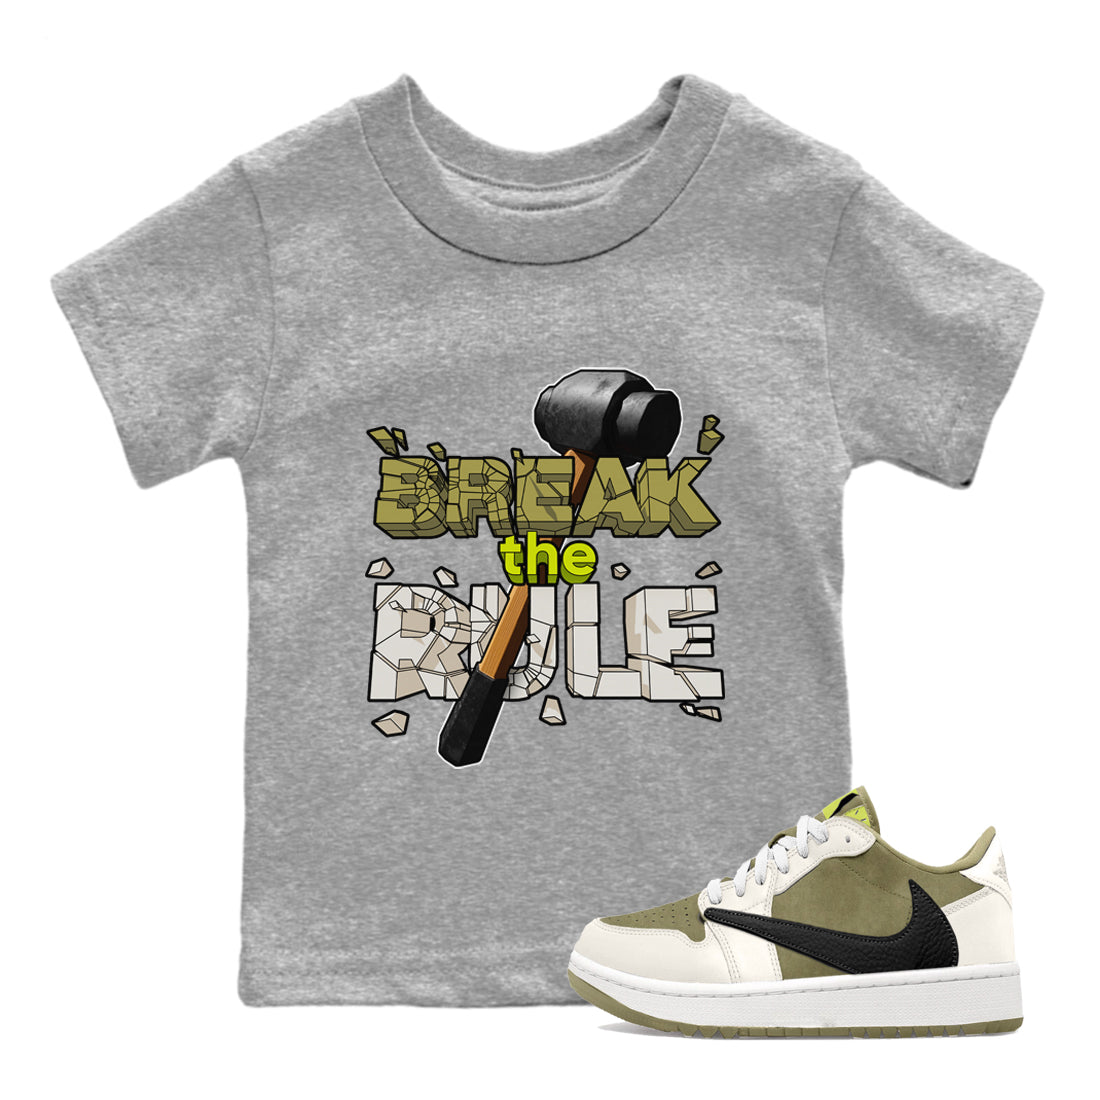 Get the NEW EDITION of the Air Yordan t-shirt by Breaking T - The